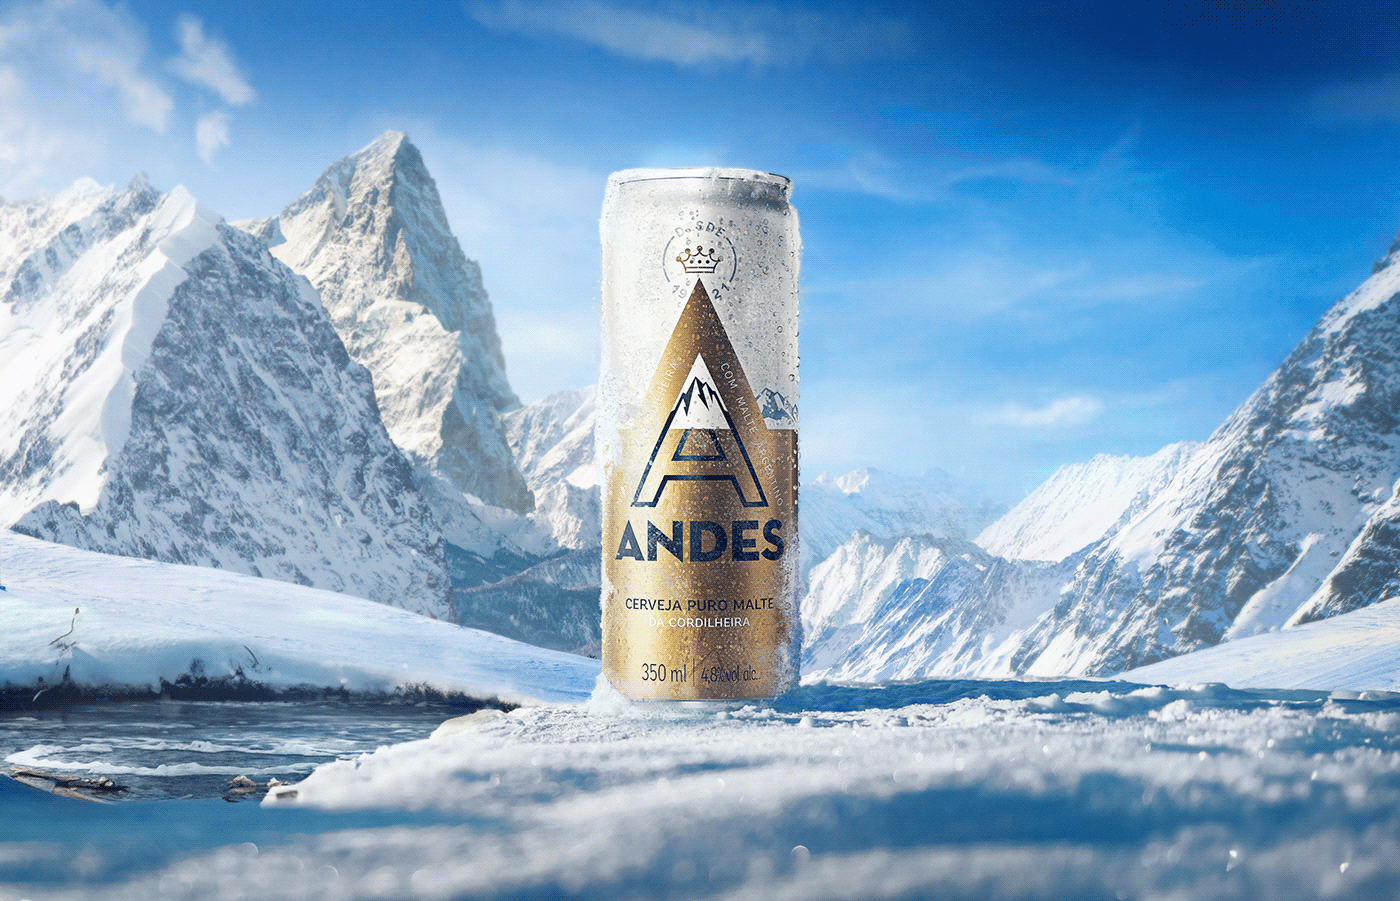 beer ads, advertising, andes beer, retouch, beer manpulation, andes beer, snow, mountains, landscape